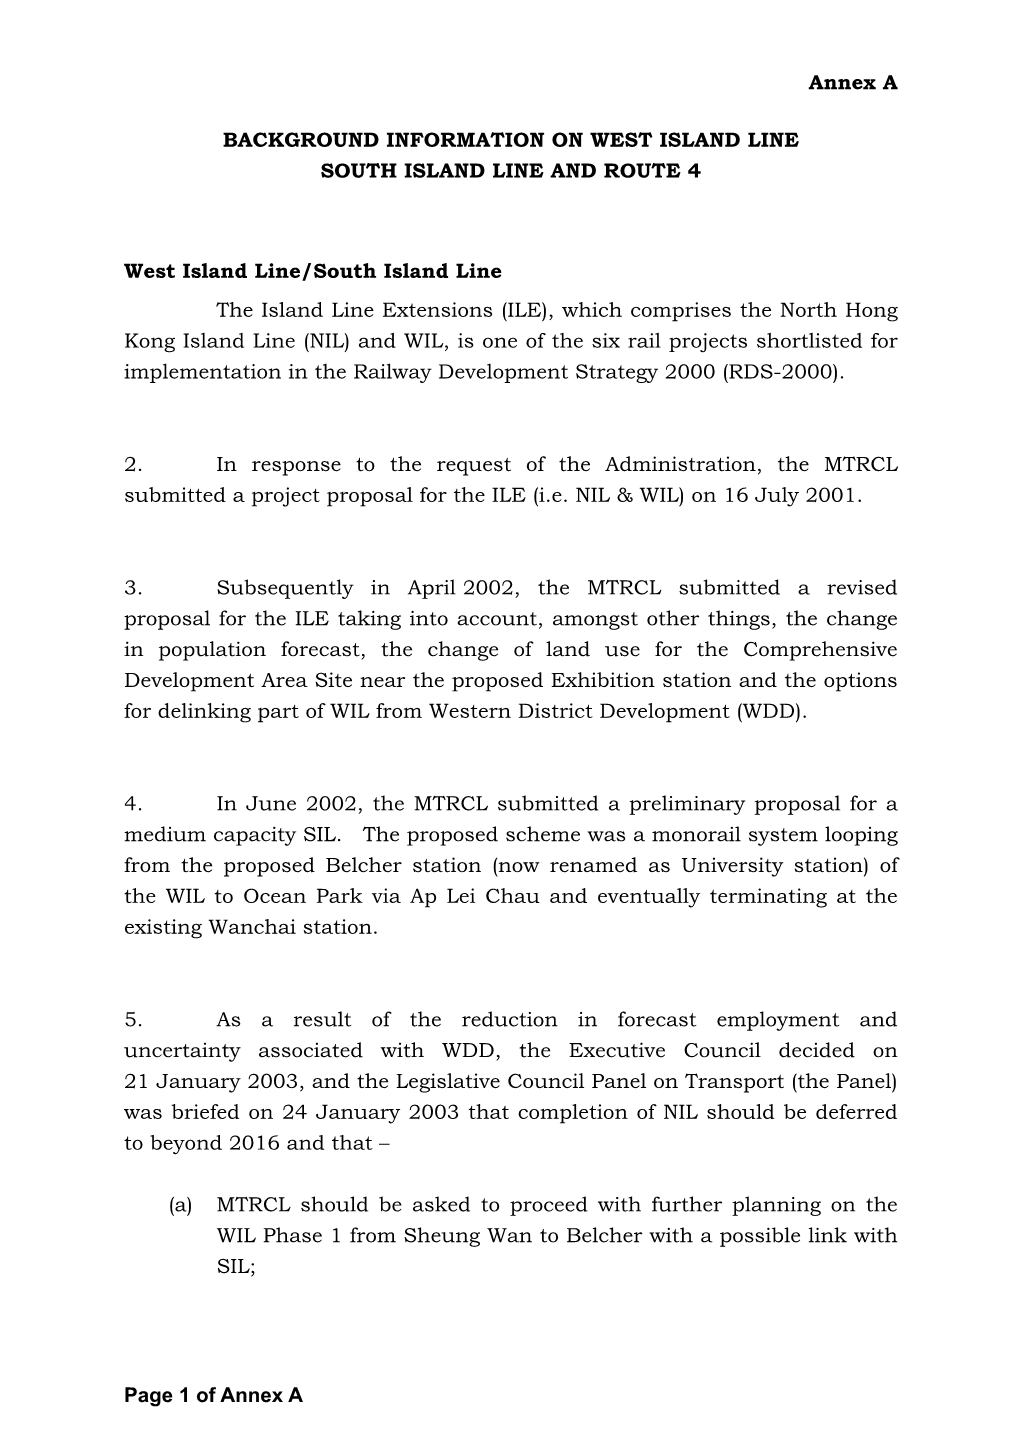 Annex a Page 1 of Annex a BACKGROUND INFORMATION on WEST ISLAND LINE SOUTH ISLAND LINE and ROUTE 4 West Island Line/South Island